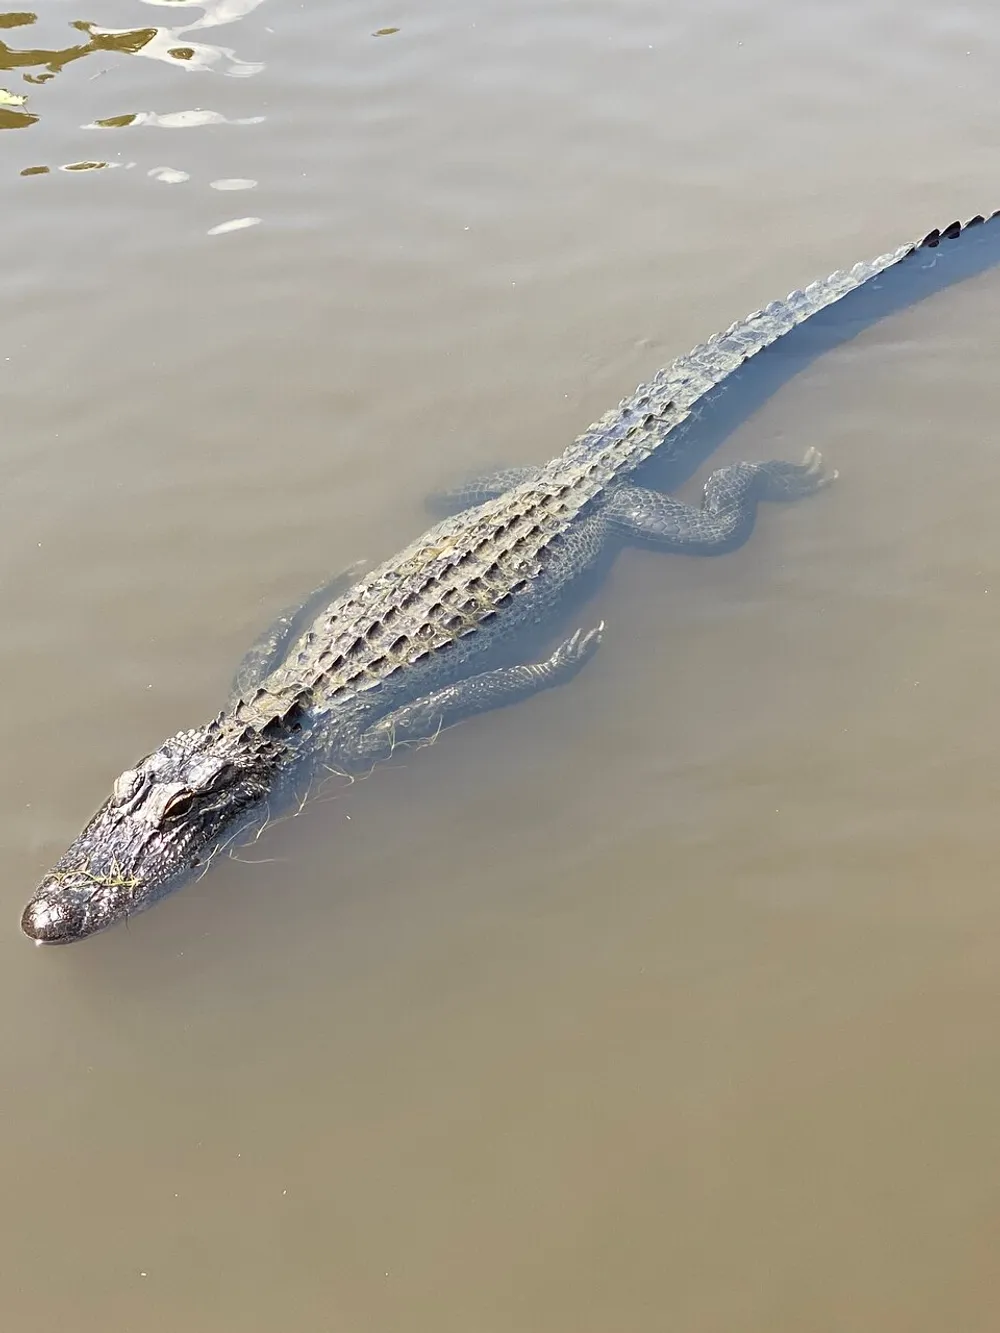 An alligator is swimming near the surface of murky water